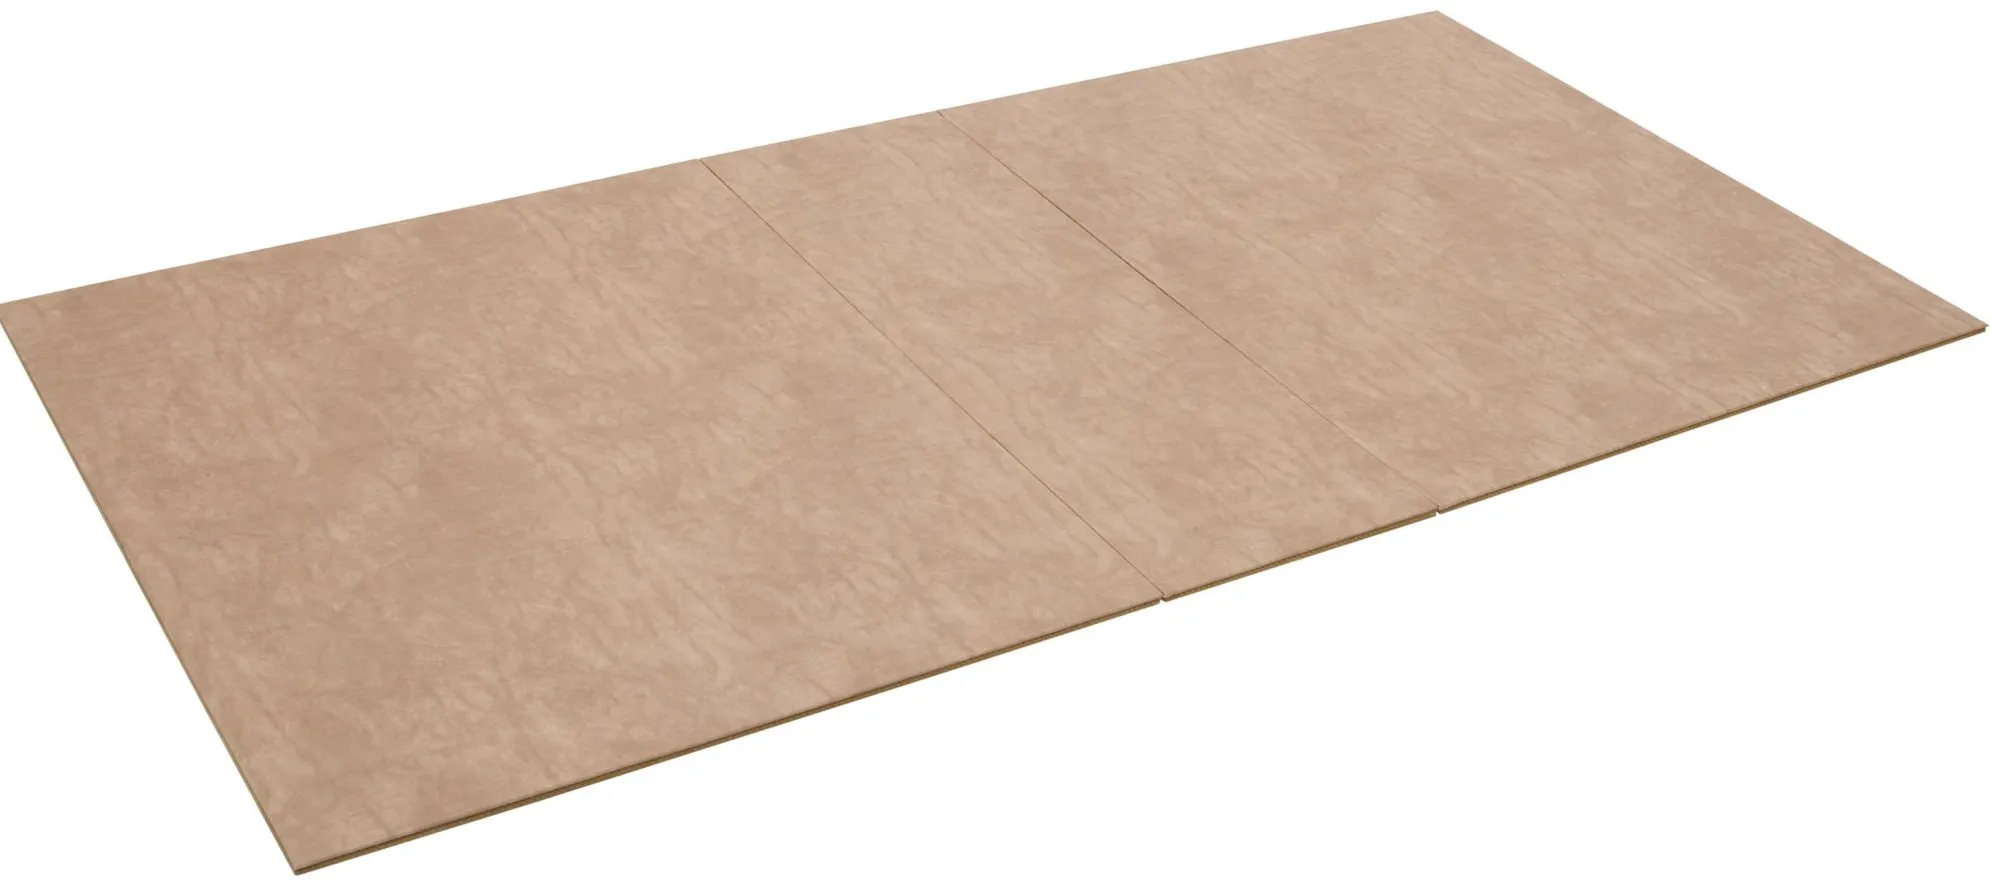 Elmwood Park Dining Table Protector in Saddle/Tan by International Table Pads